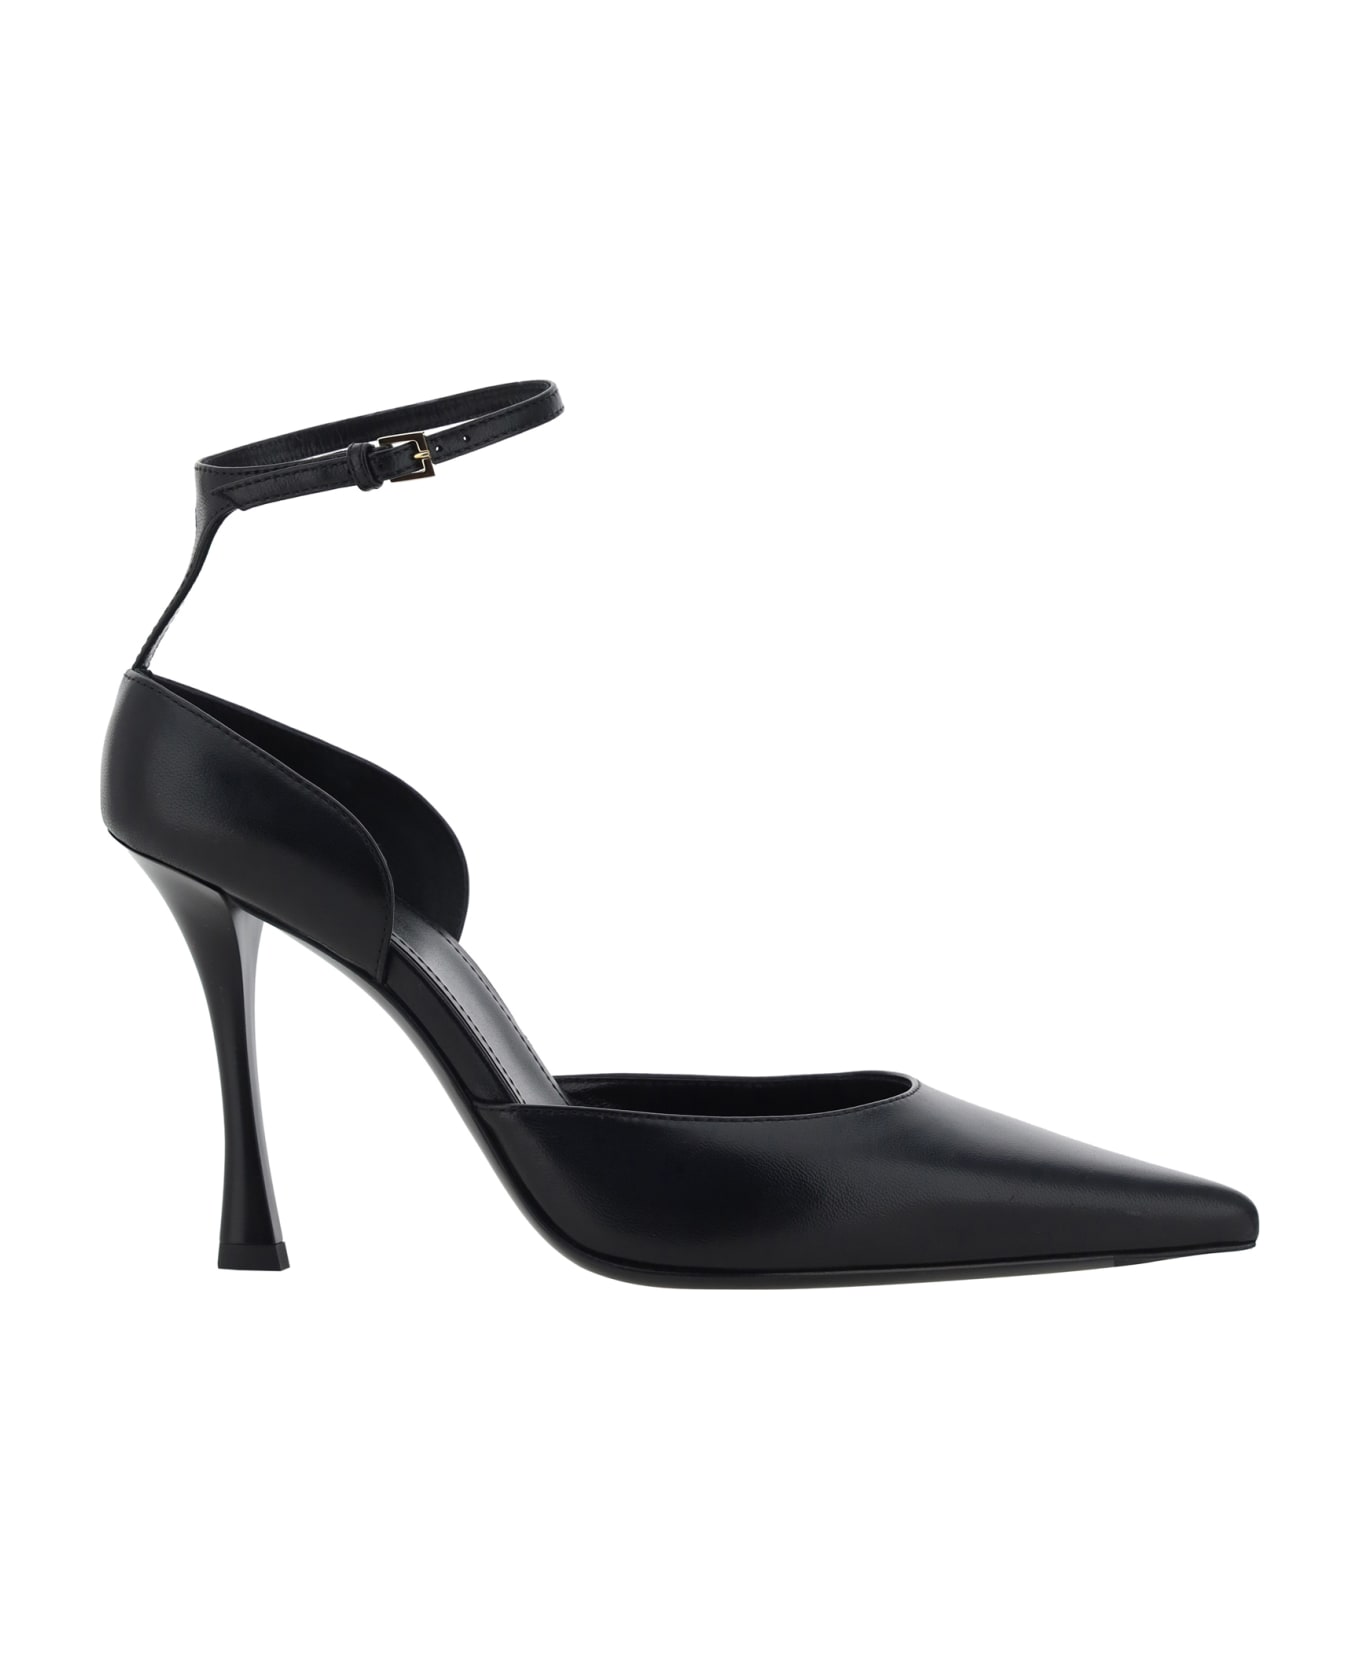 Givenchy Show Stocking Pumps - Black